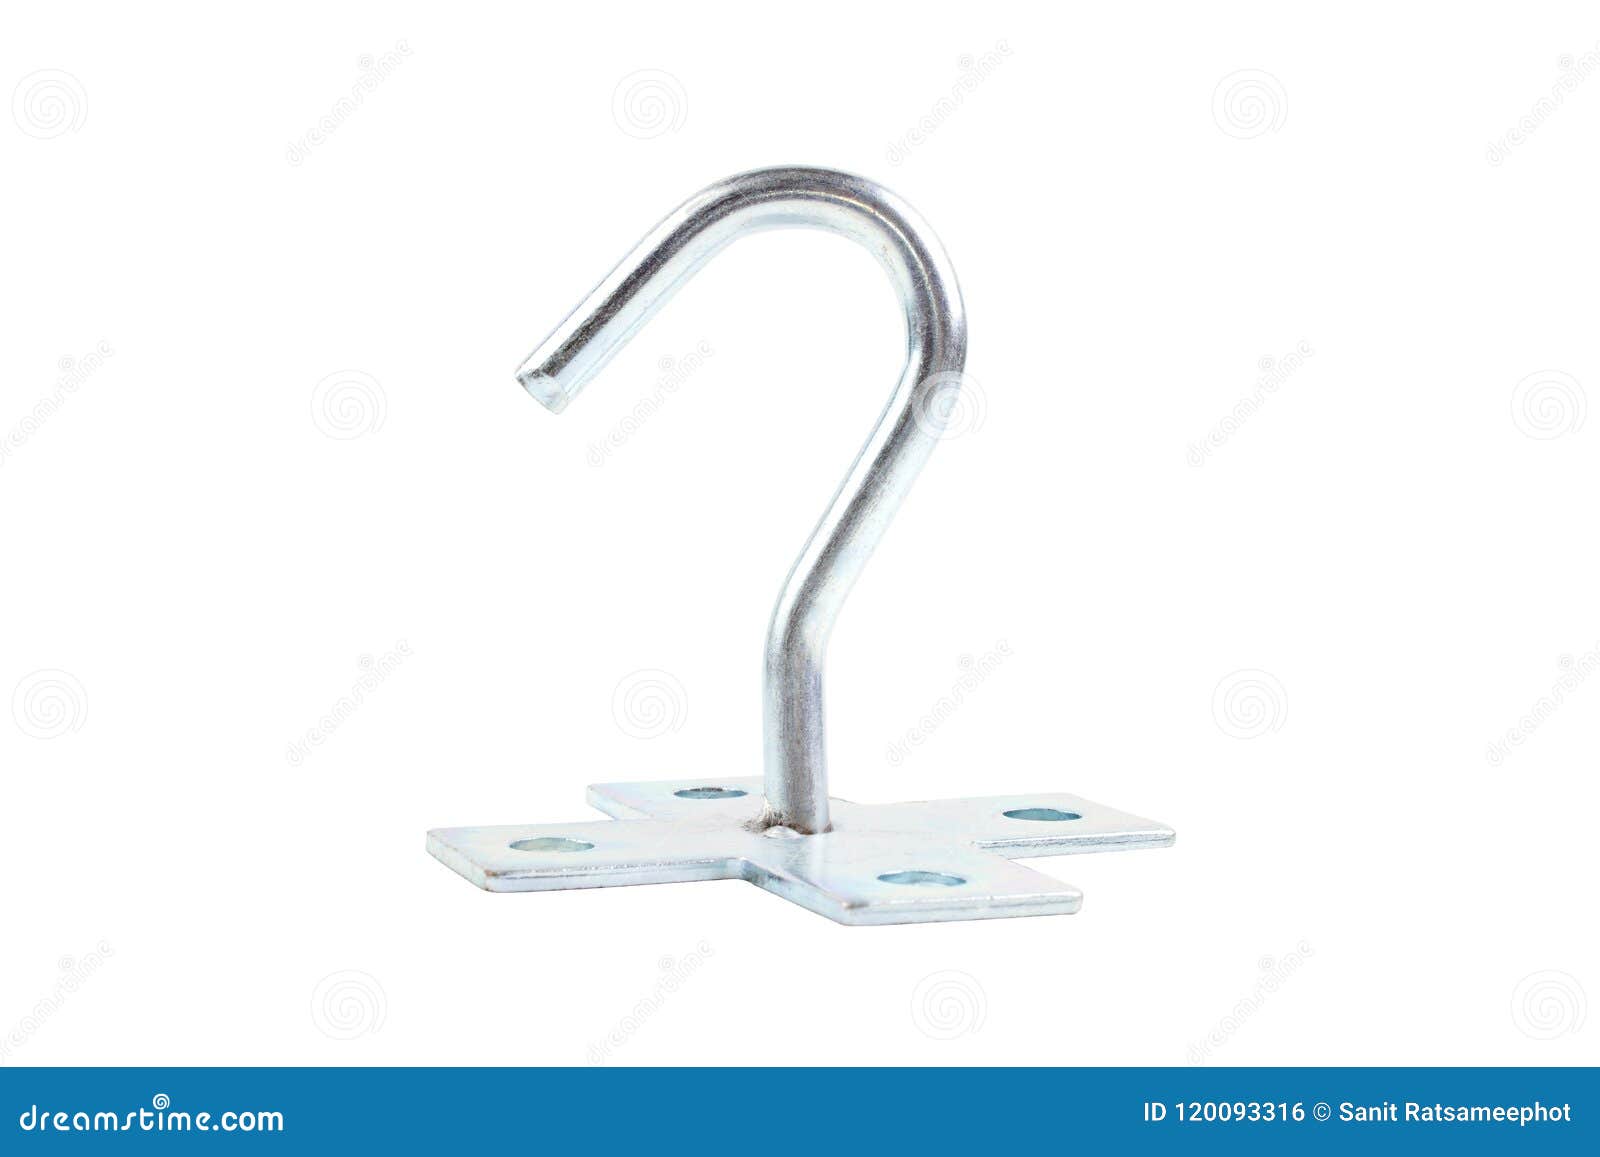 Large Steel Hook For Fixtures On Wall Stock Photo Image